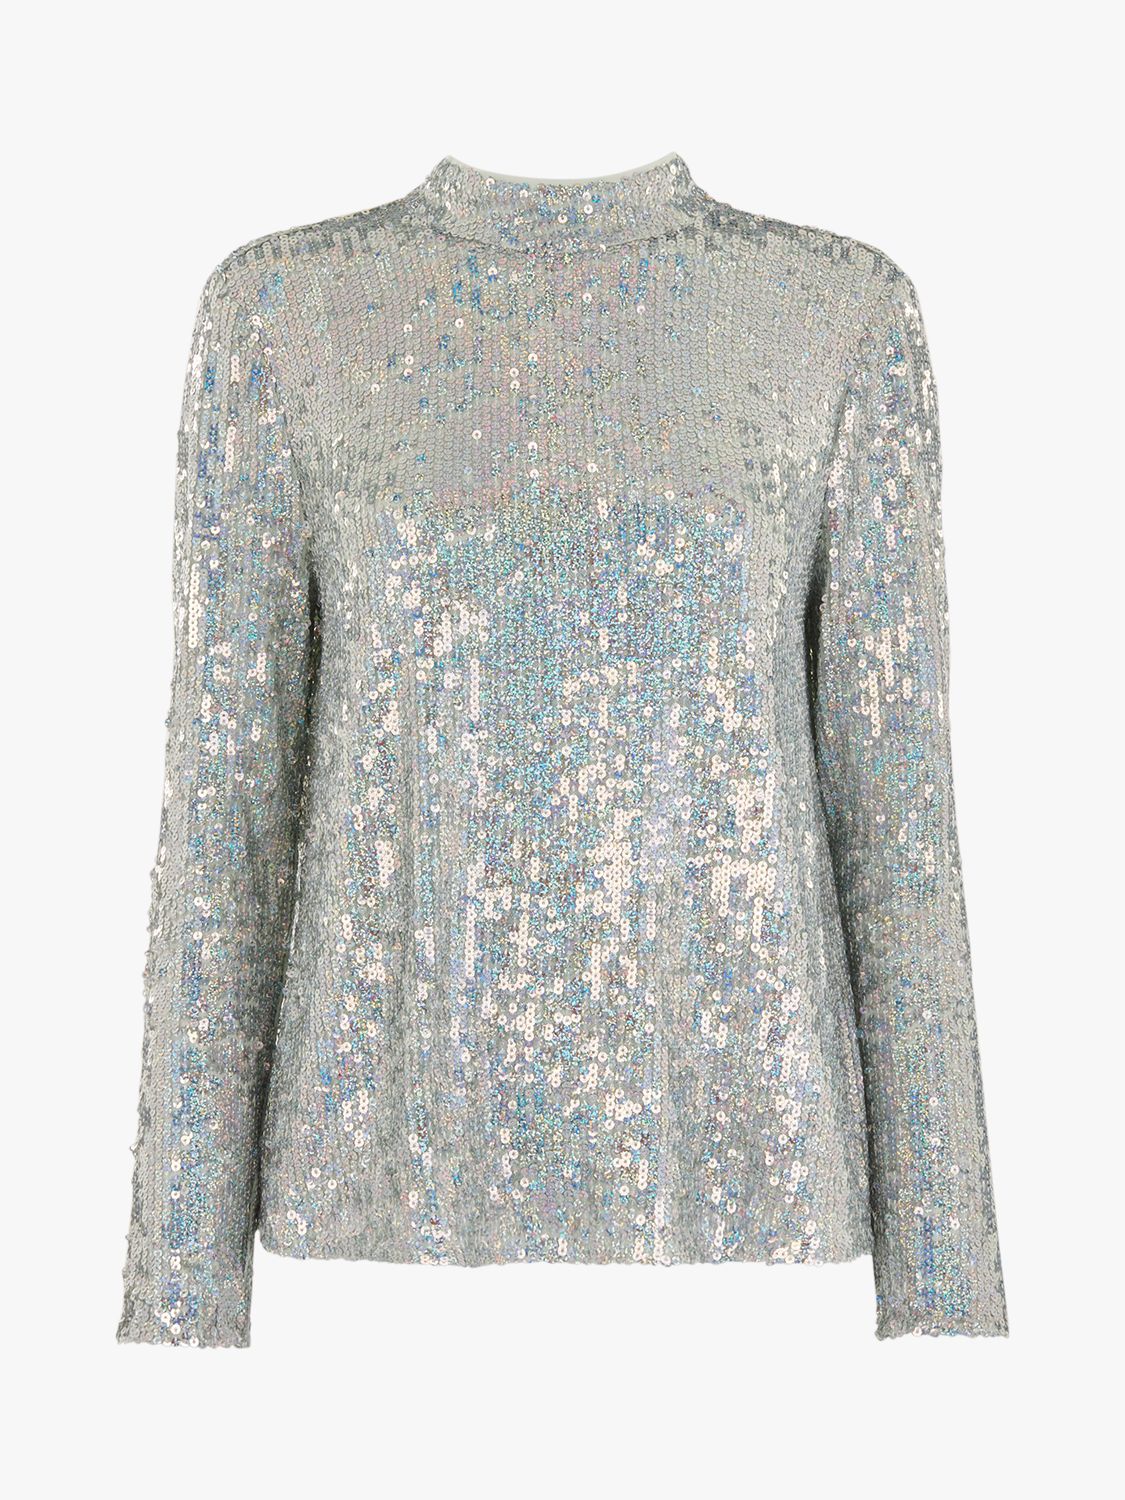 Whistles High Neck Sequin Top, Silver at John Lewis & Partners